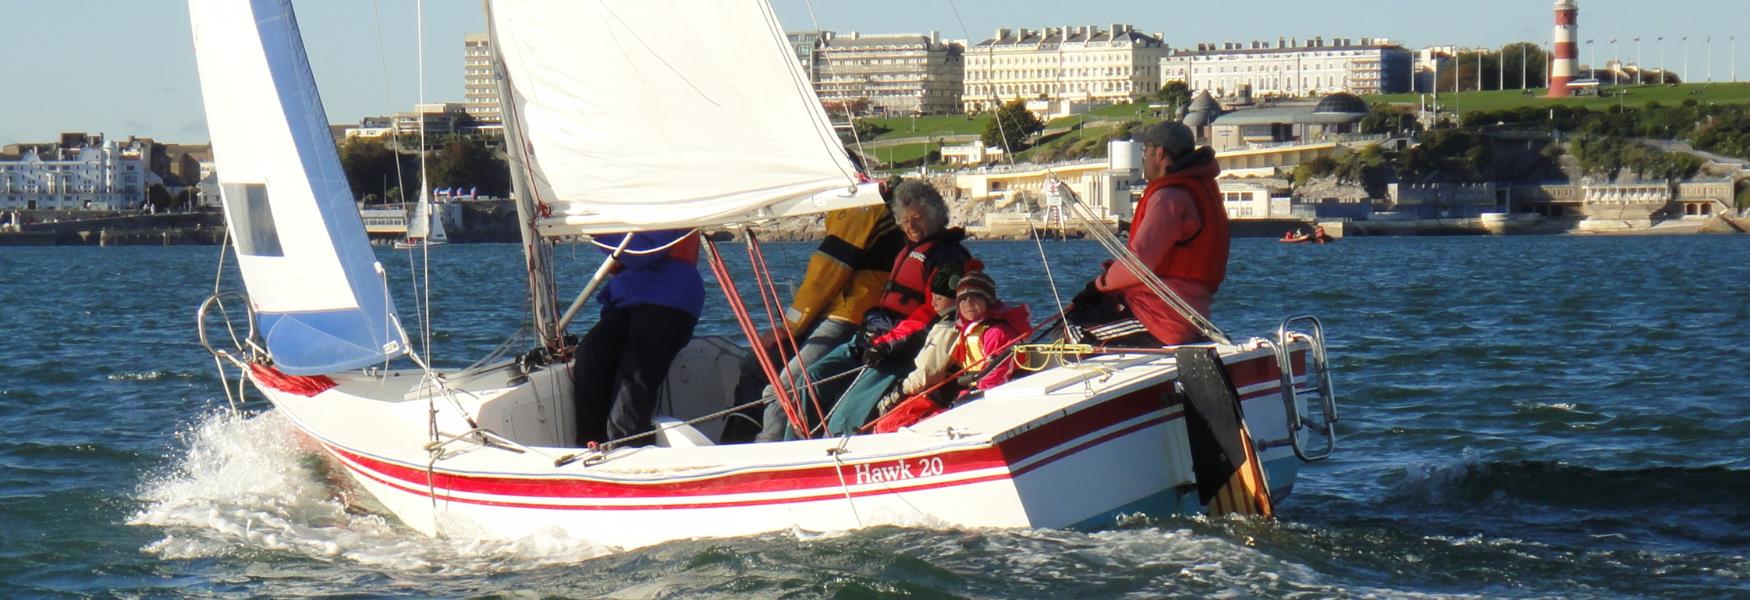 Sailing experience Plymouth Sound